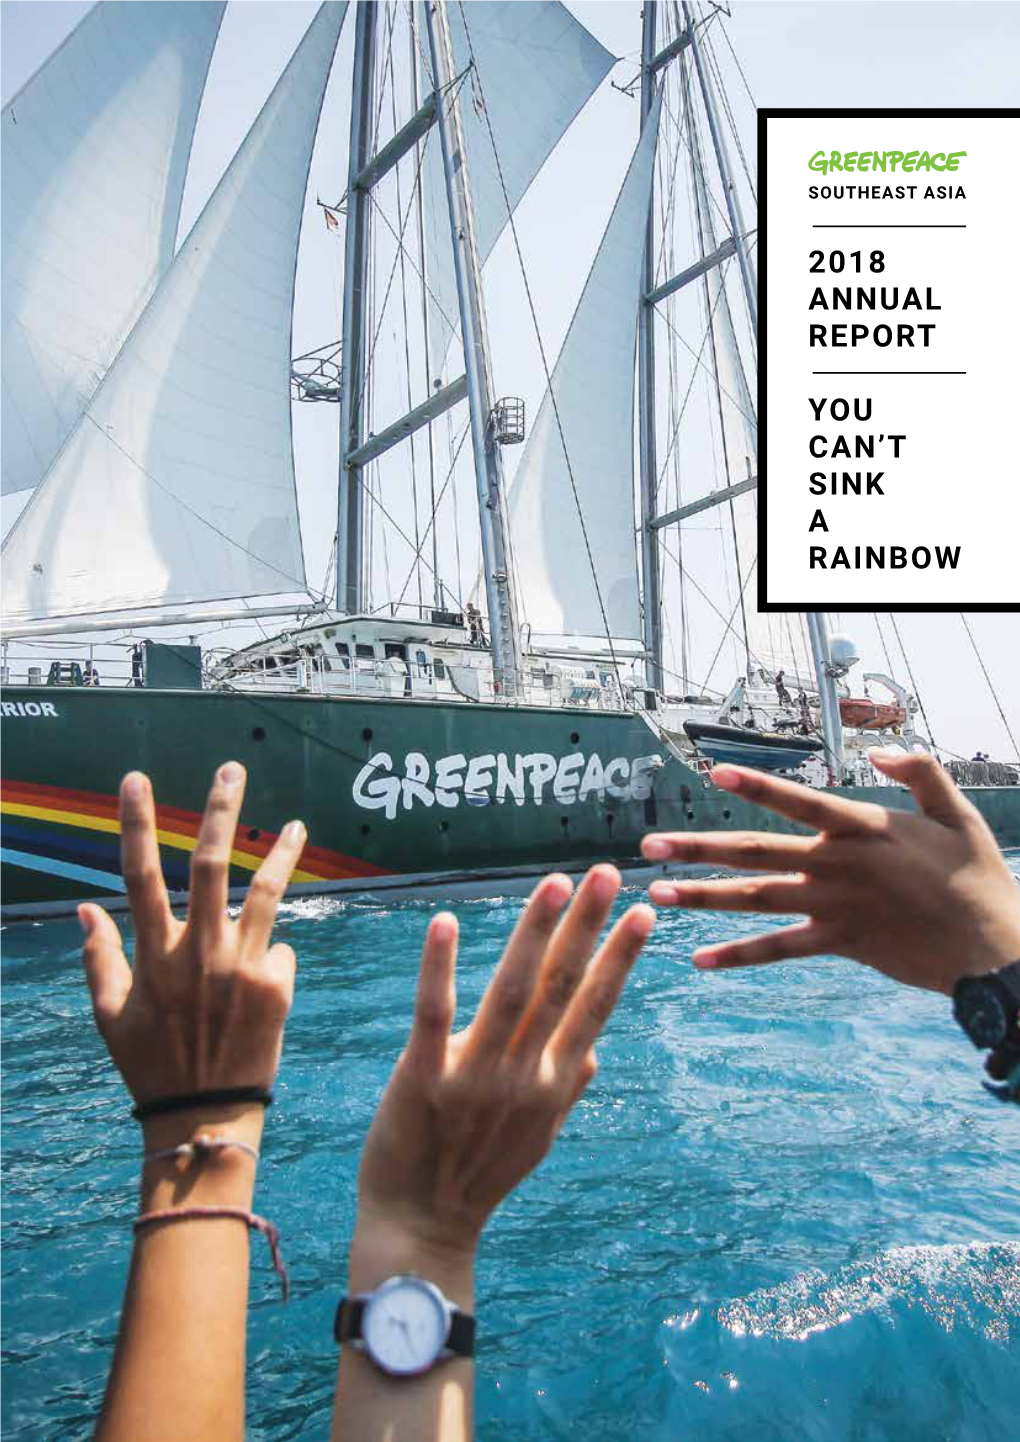 2018 Annual Report You Can't Sink a Rainbow